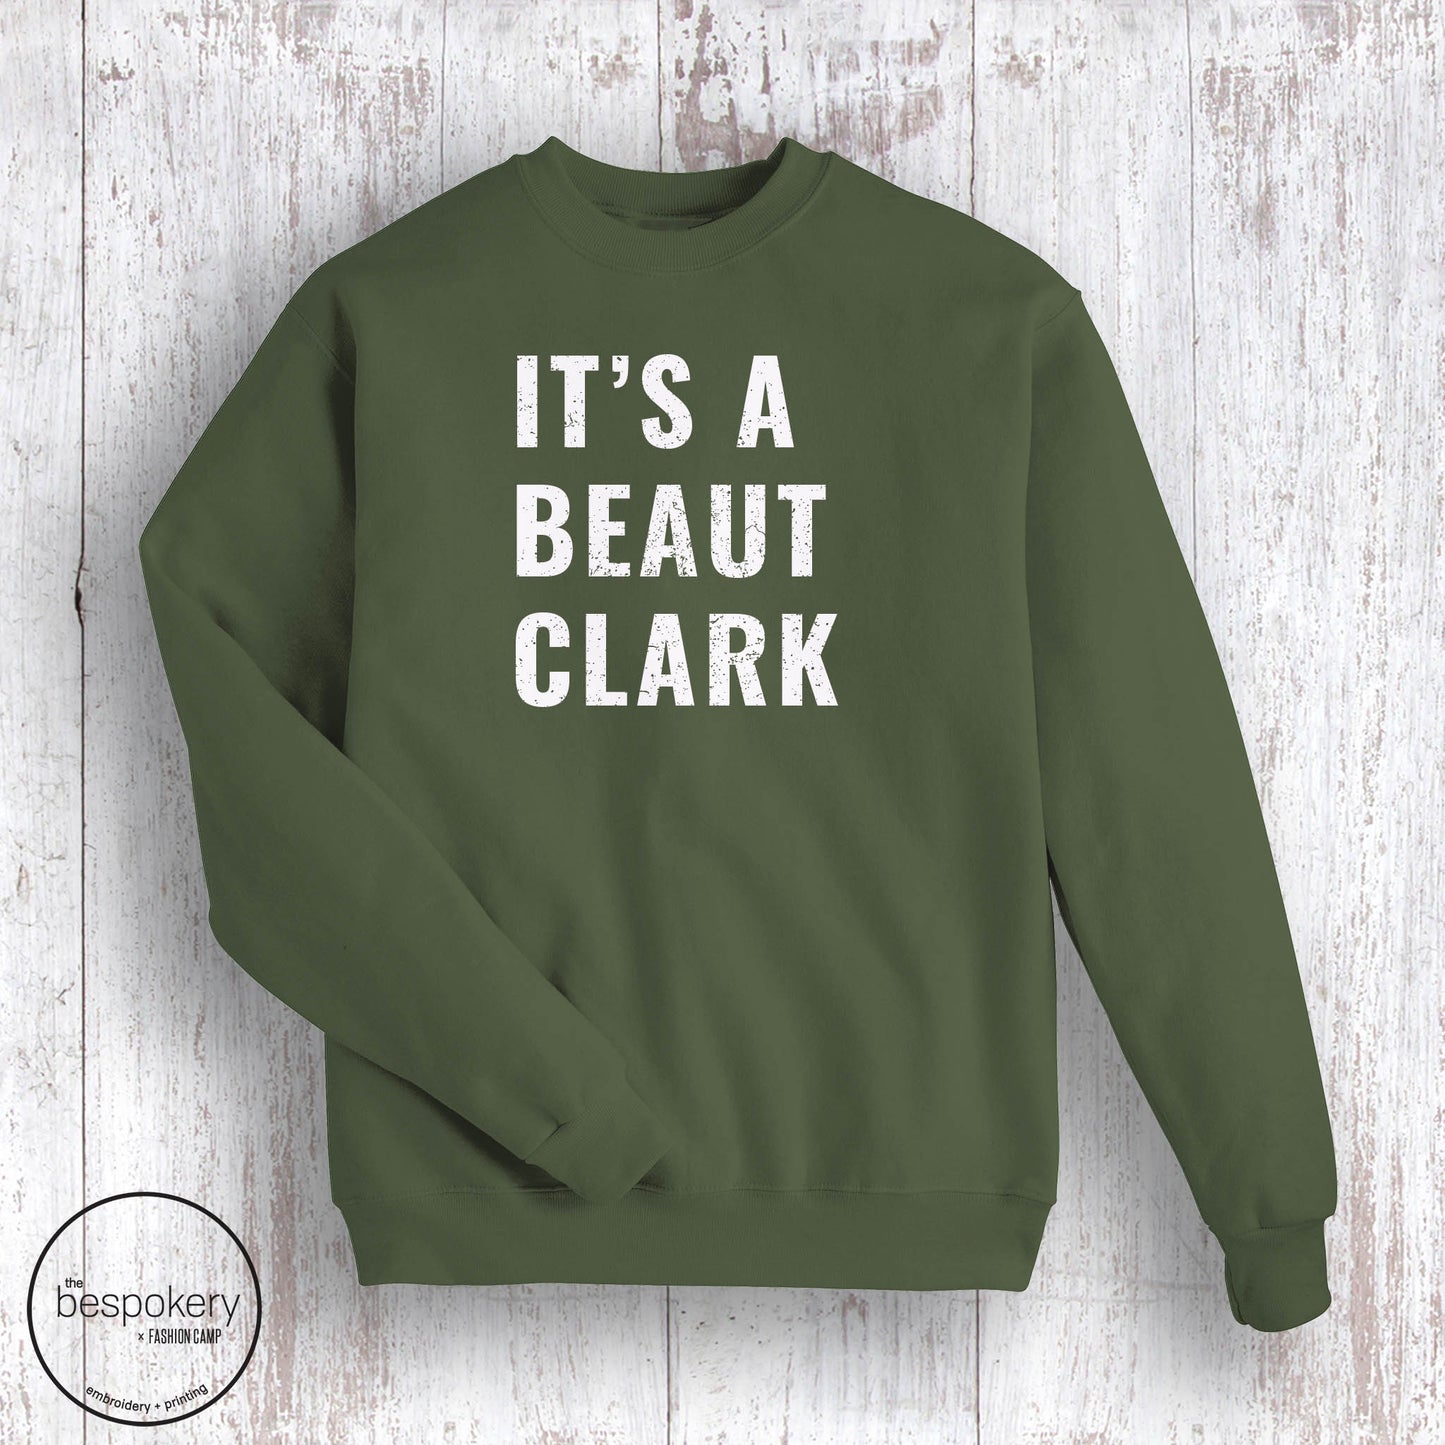 "It's A Beaut Clark" - Military Green Sweatshirt (Adult Only)